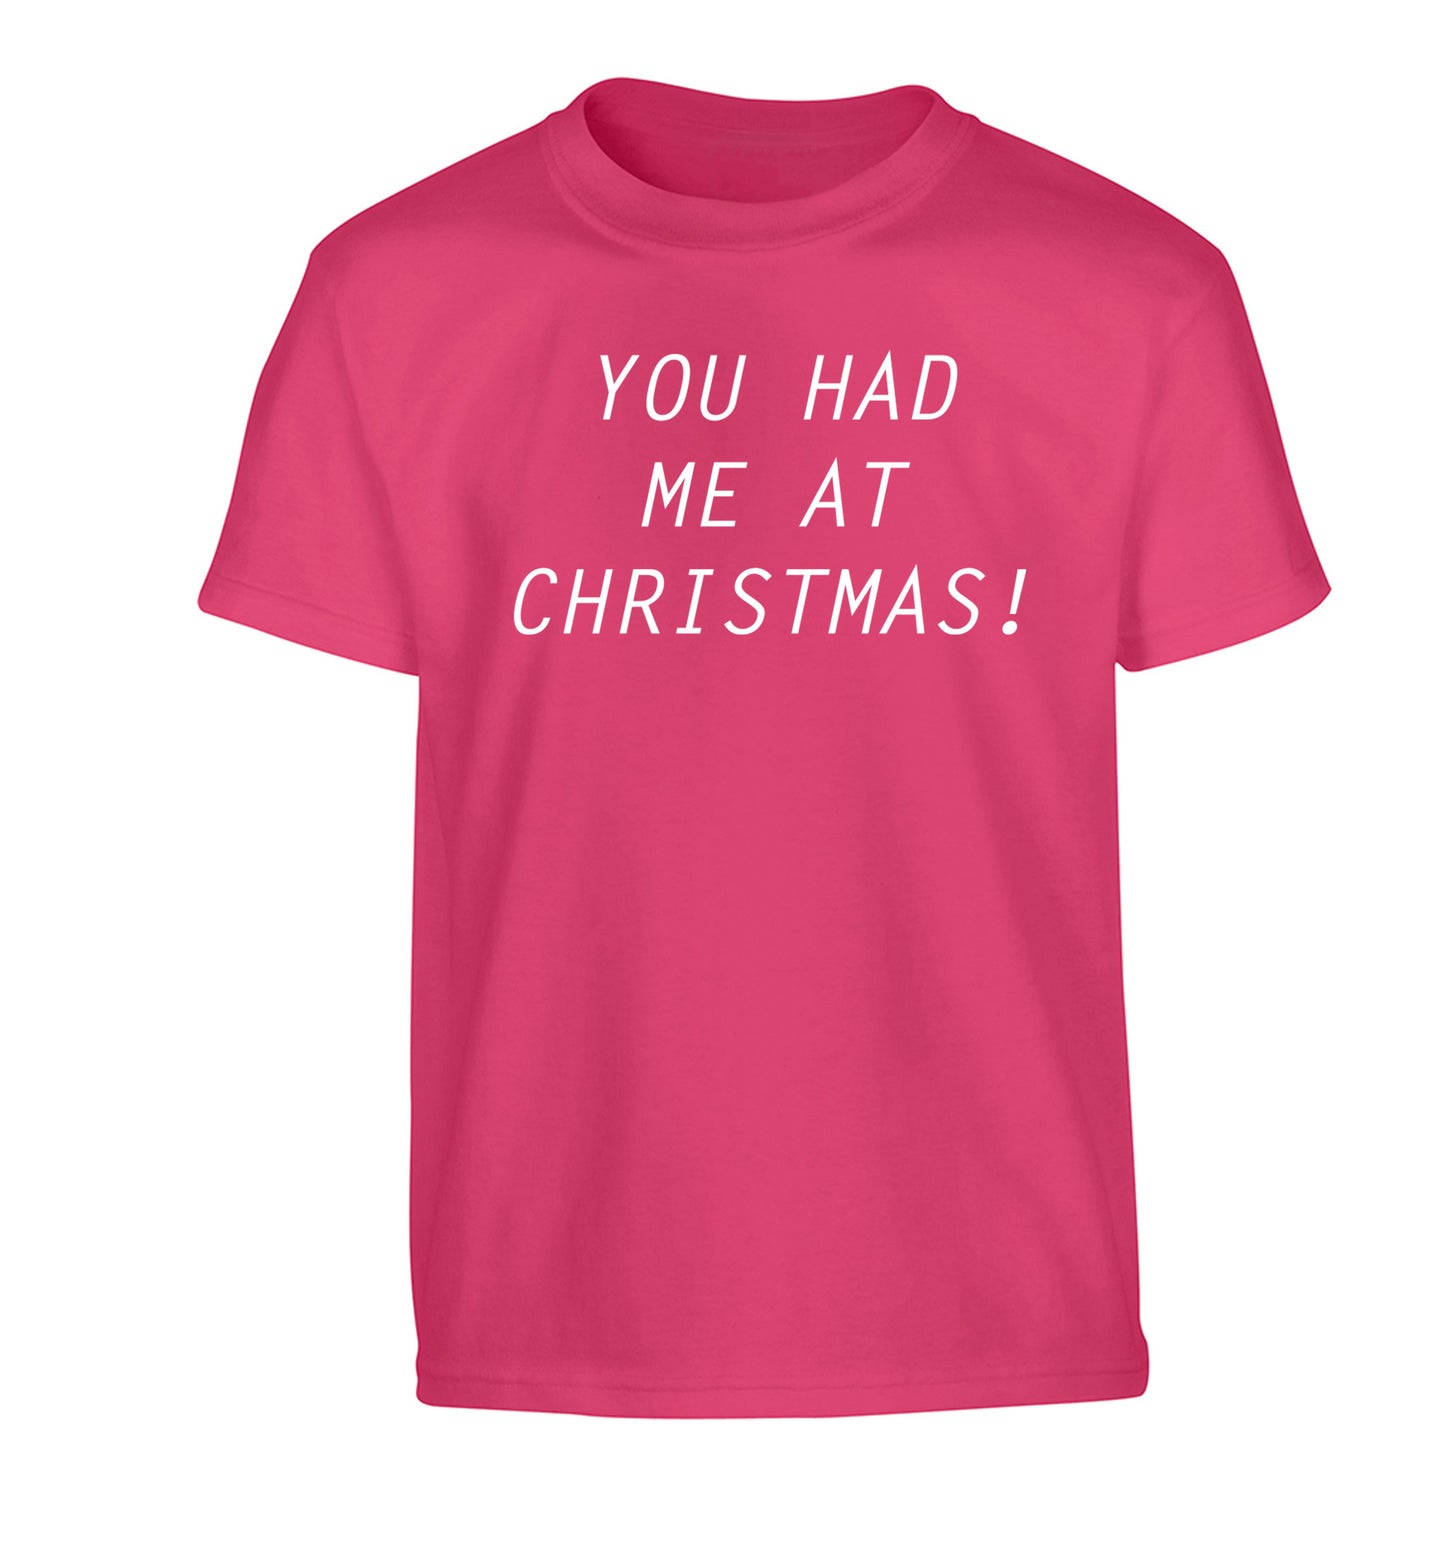 You had me at Christmas Children's pink Tshirt 12-14 Years